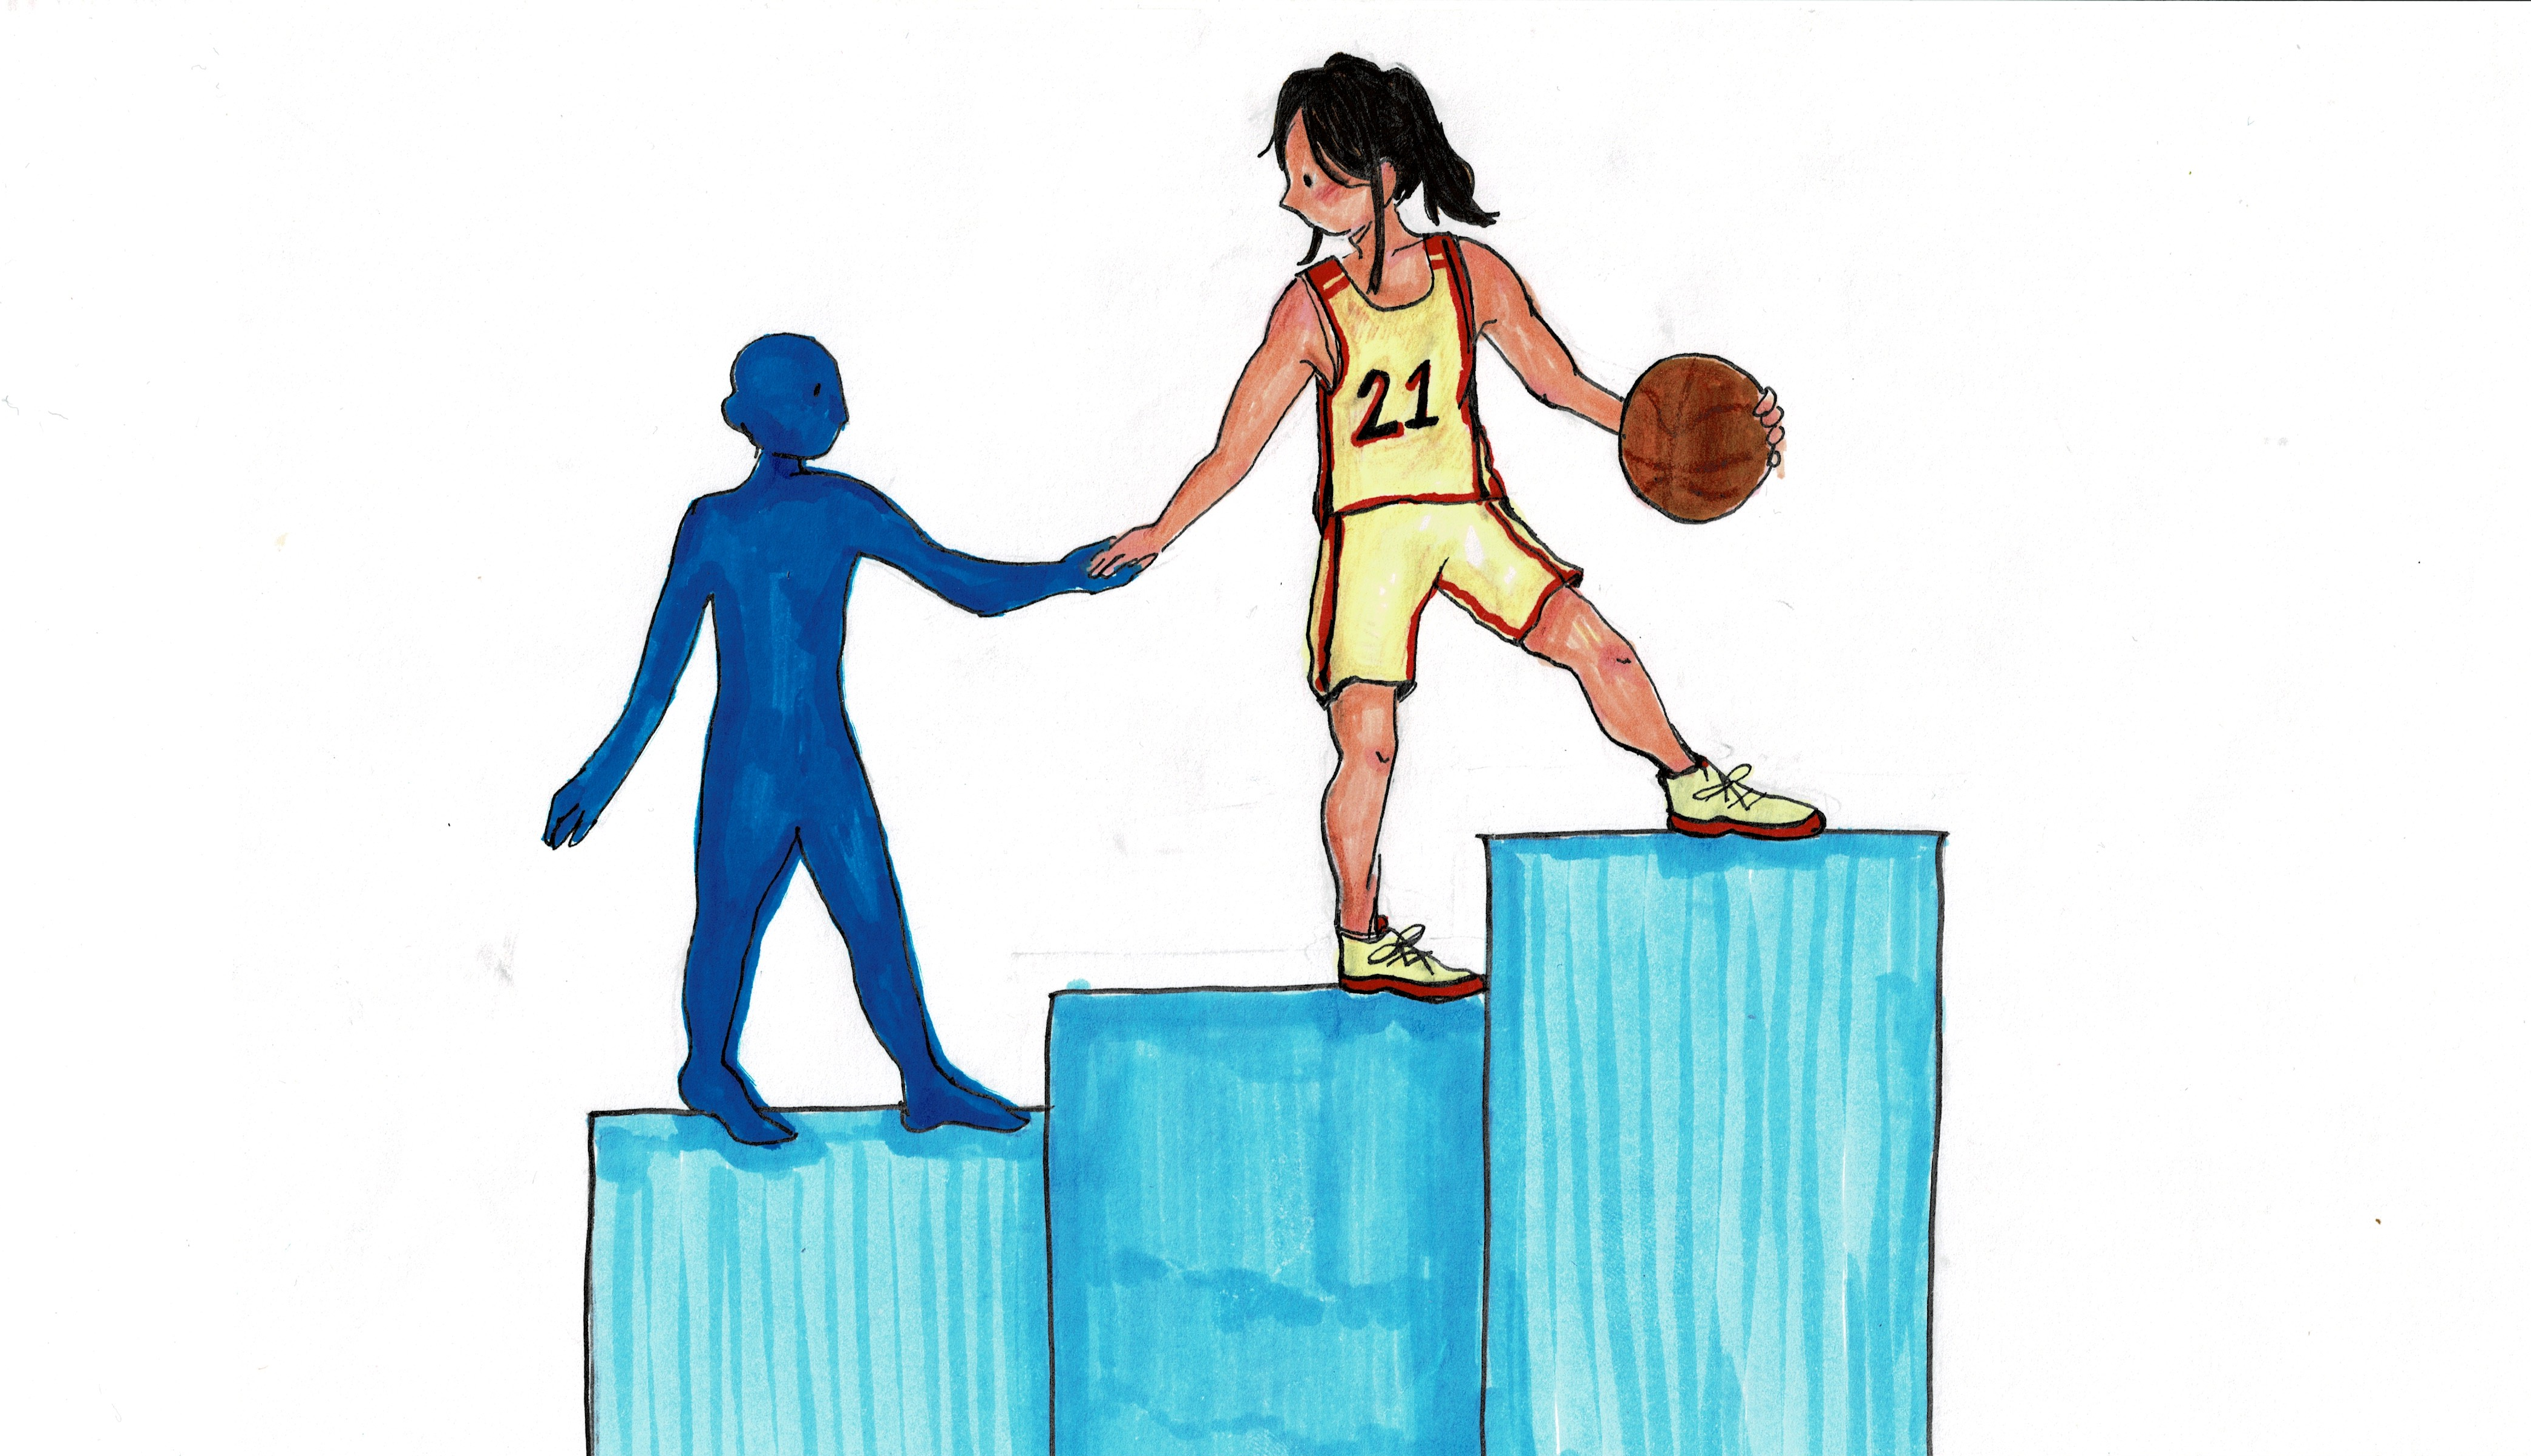 A person wearing a jersey holds the hands of a blue person on a series of ascending rectangles